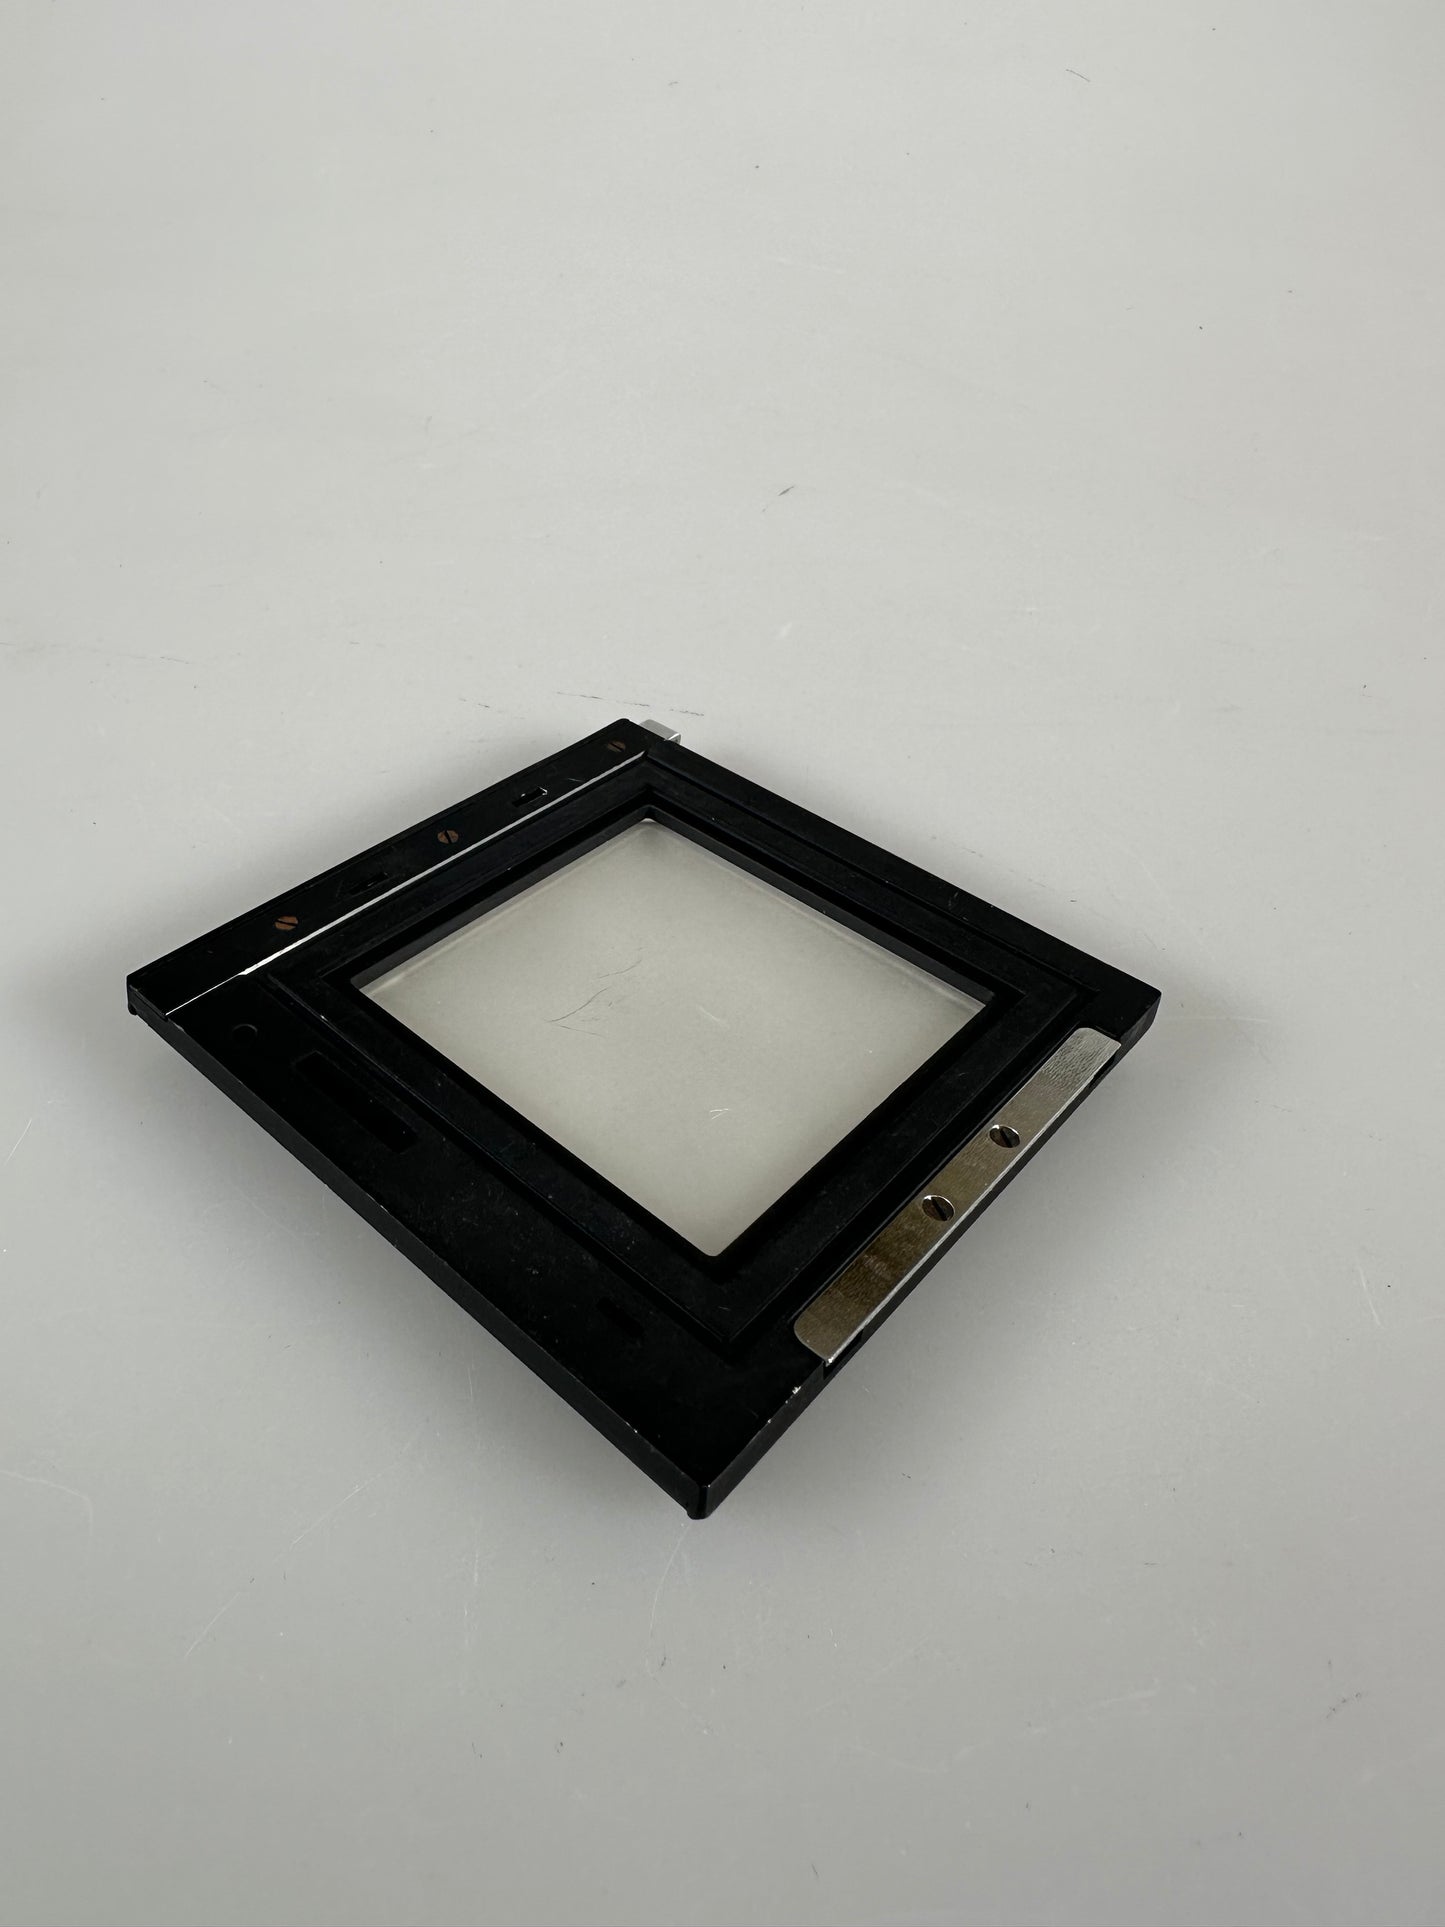 Hasselblad Ground Glass focusing adapter for SWC